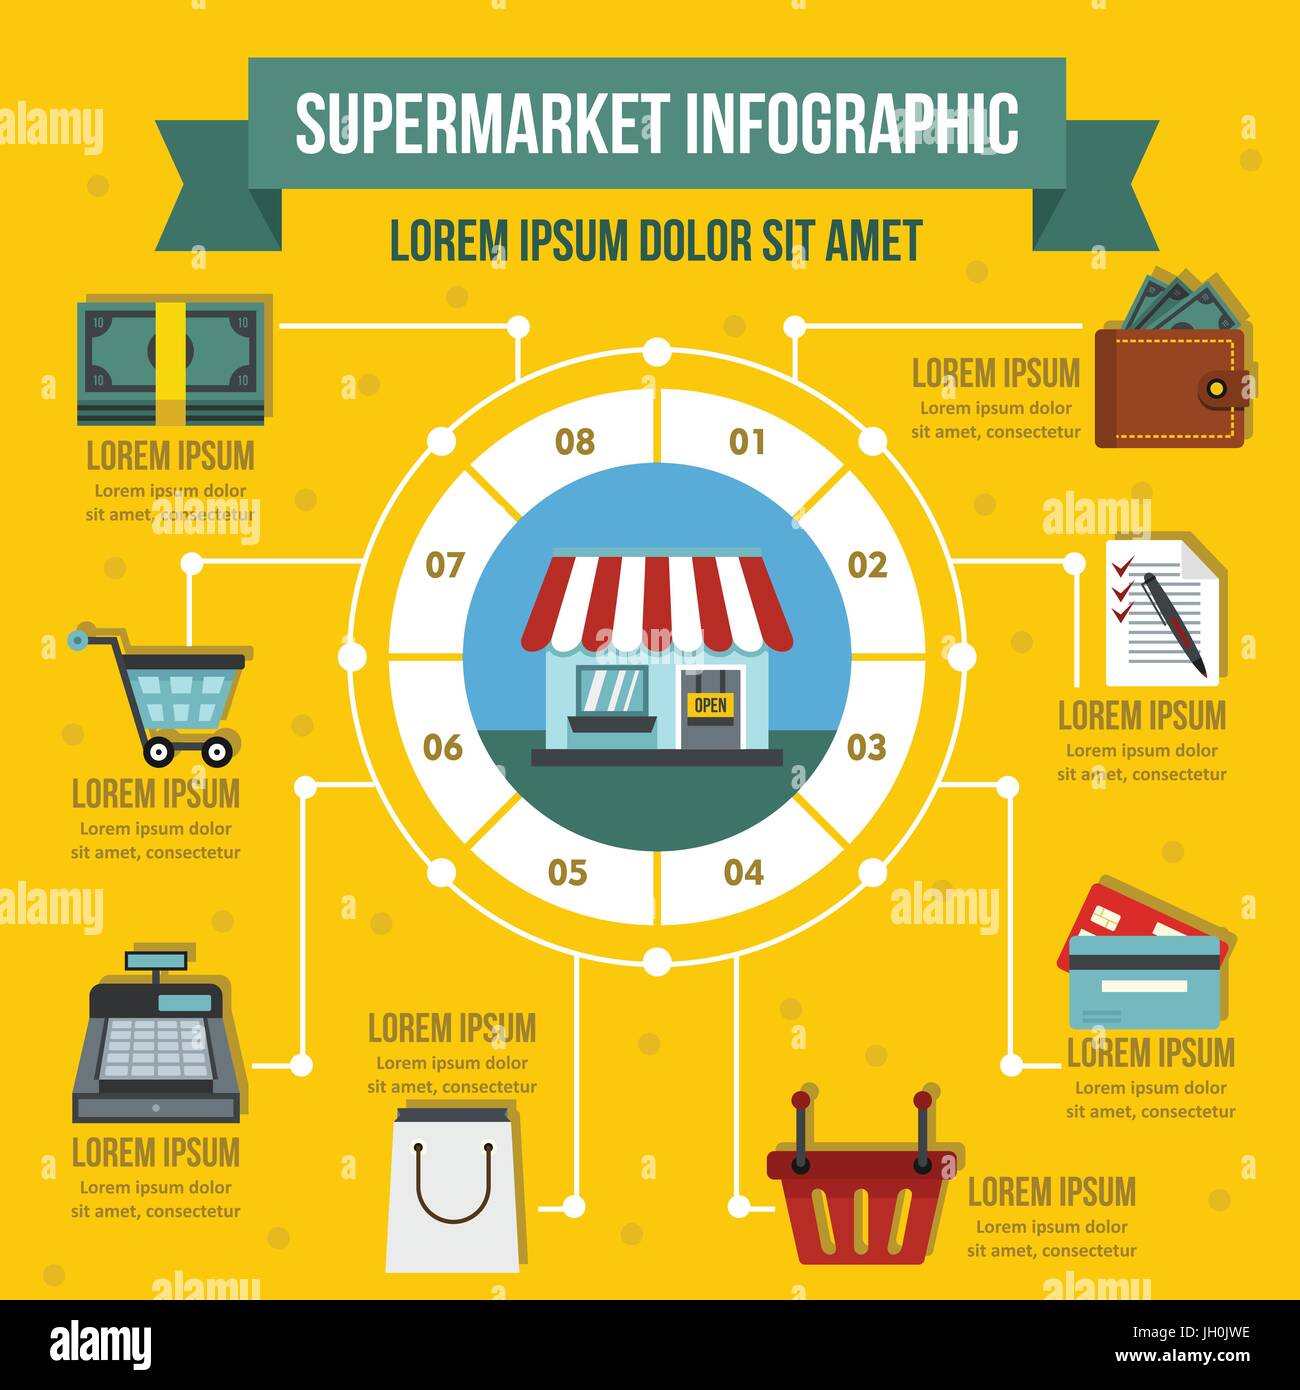 Supermarket infographic concept, flat style Stock Vector